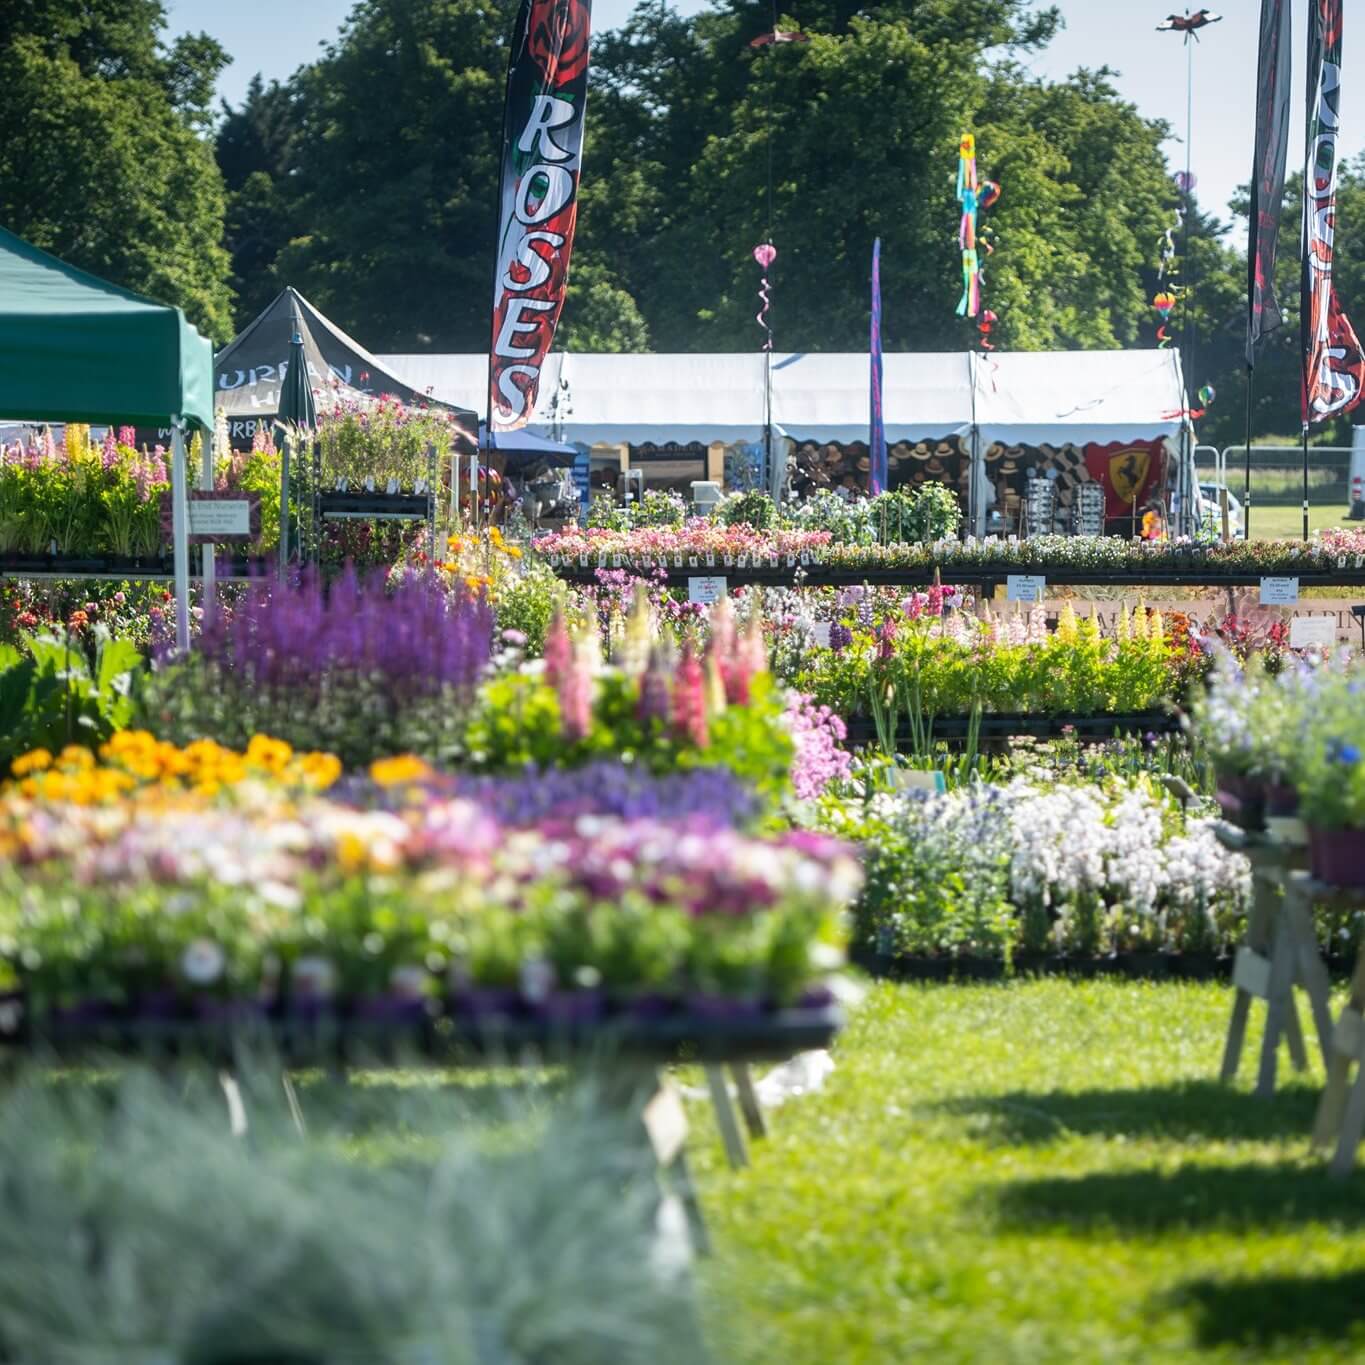 5 Wonderful Flower Shows in England to Visit This Summer